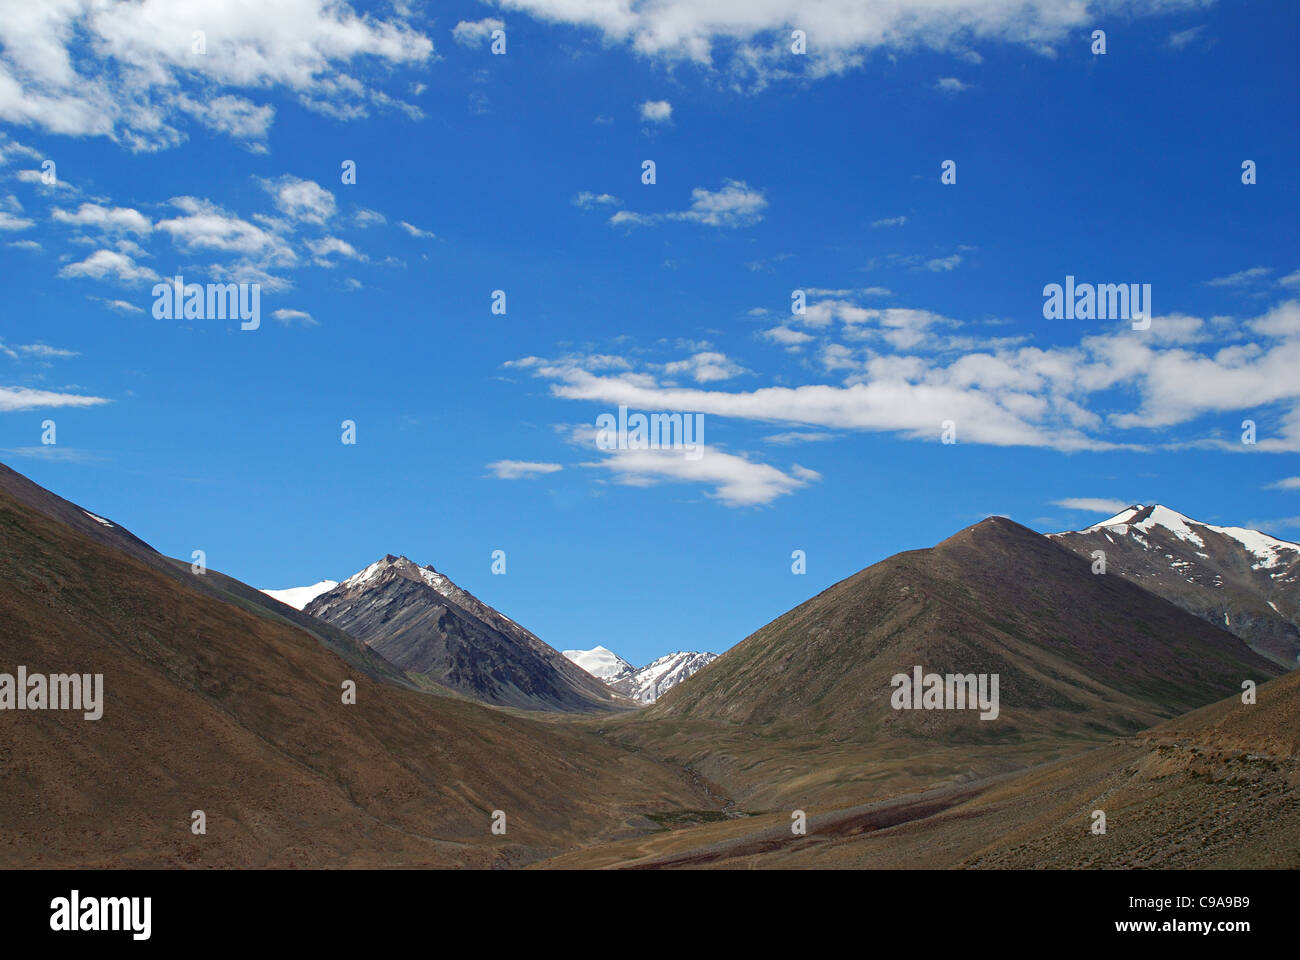 The truck on road to Leh, on the right hand bottom corner. Snow clad Himalayan Mountain Ranges, White clouds and Blue sky in the Stock Photo